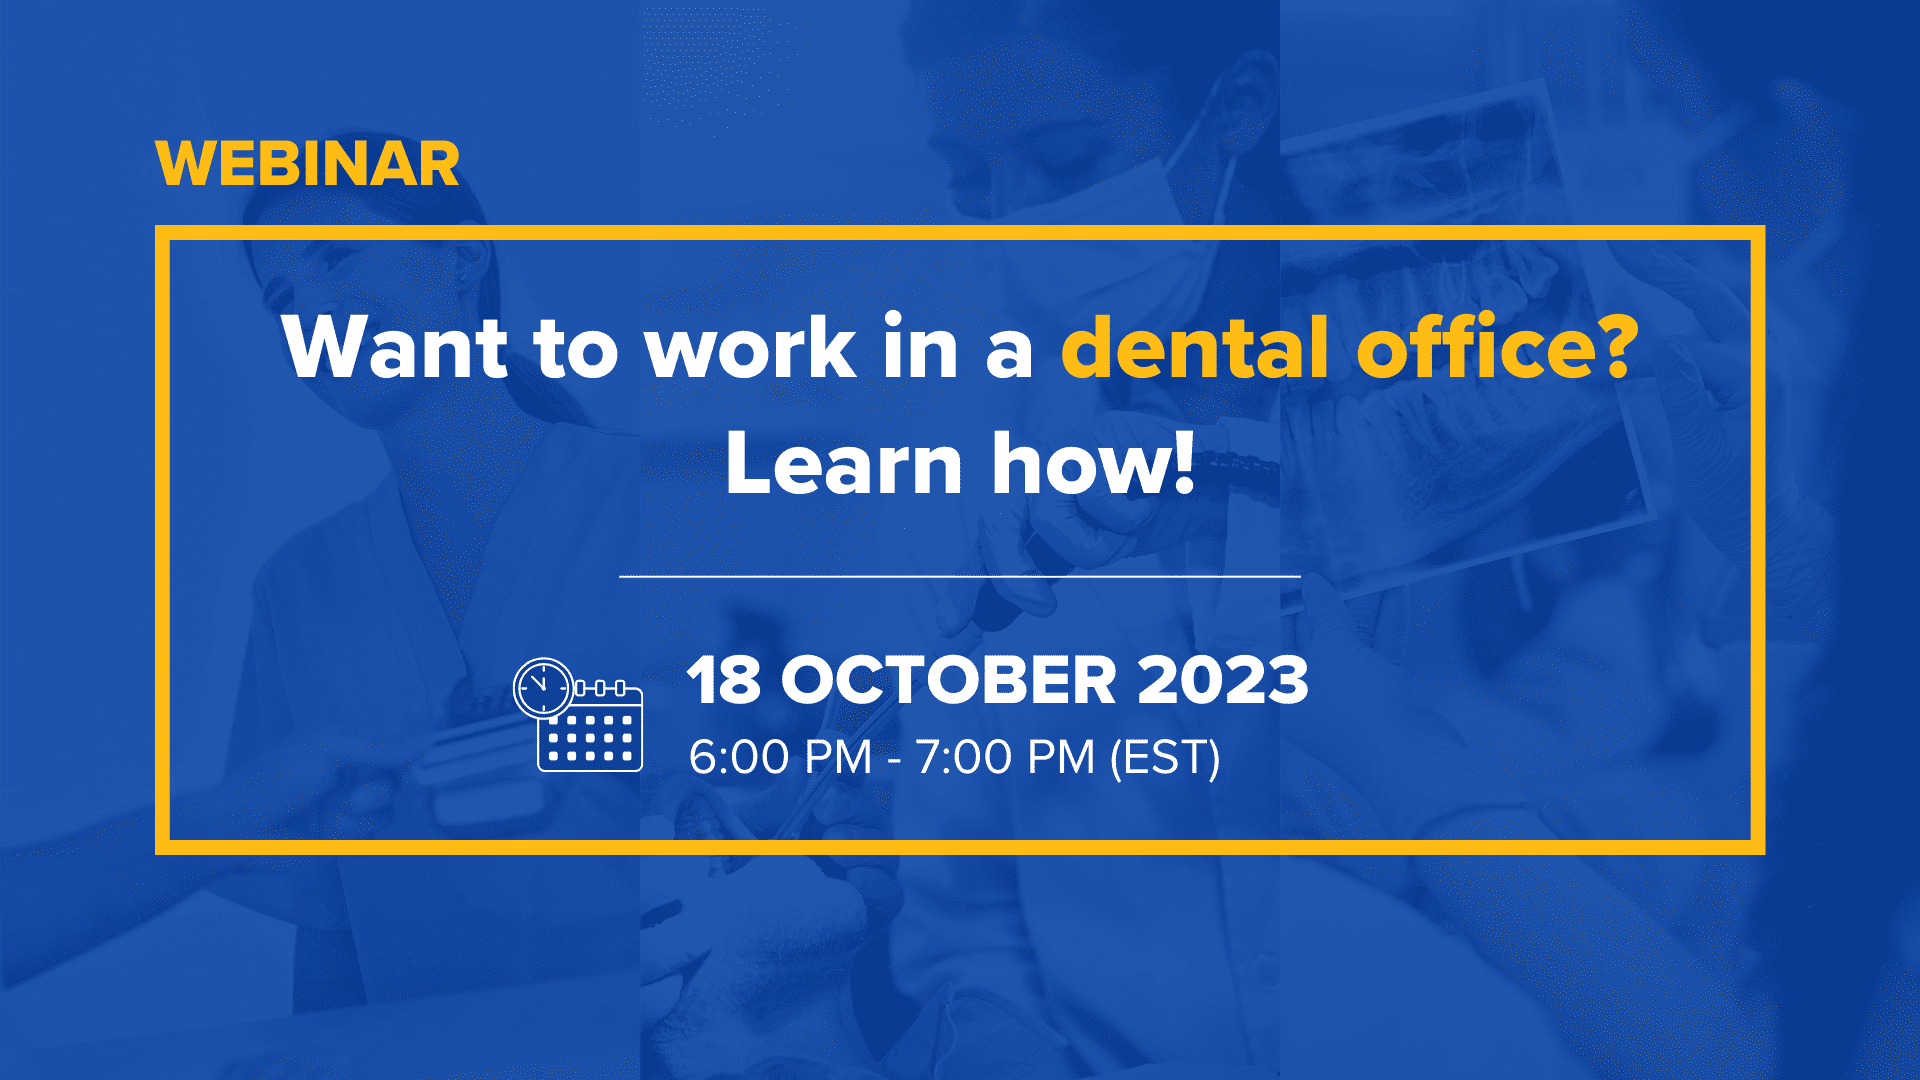 Featured image for https://williscollege.com/upcoming-events/webinar-your-future-in-dental-healthcare/ event